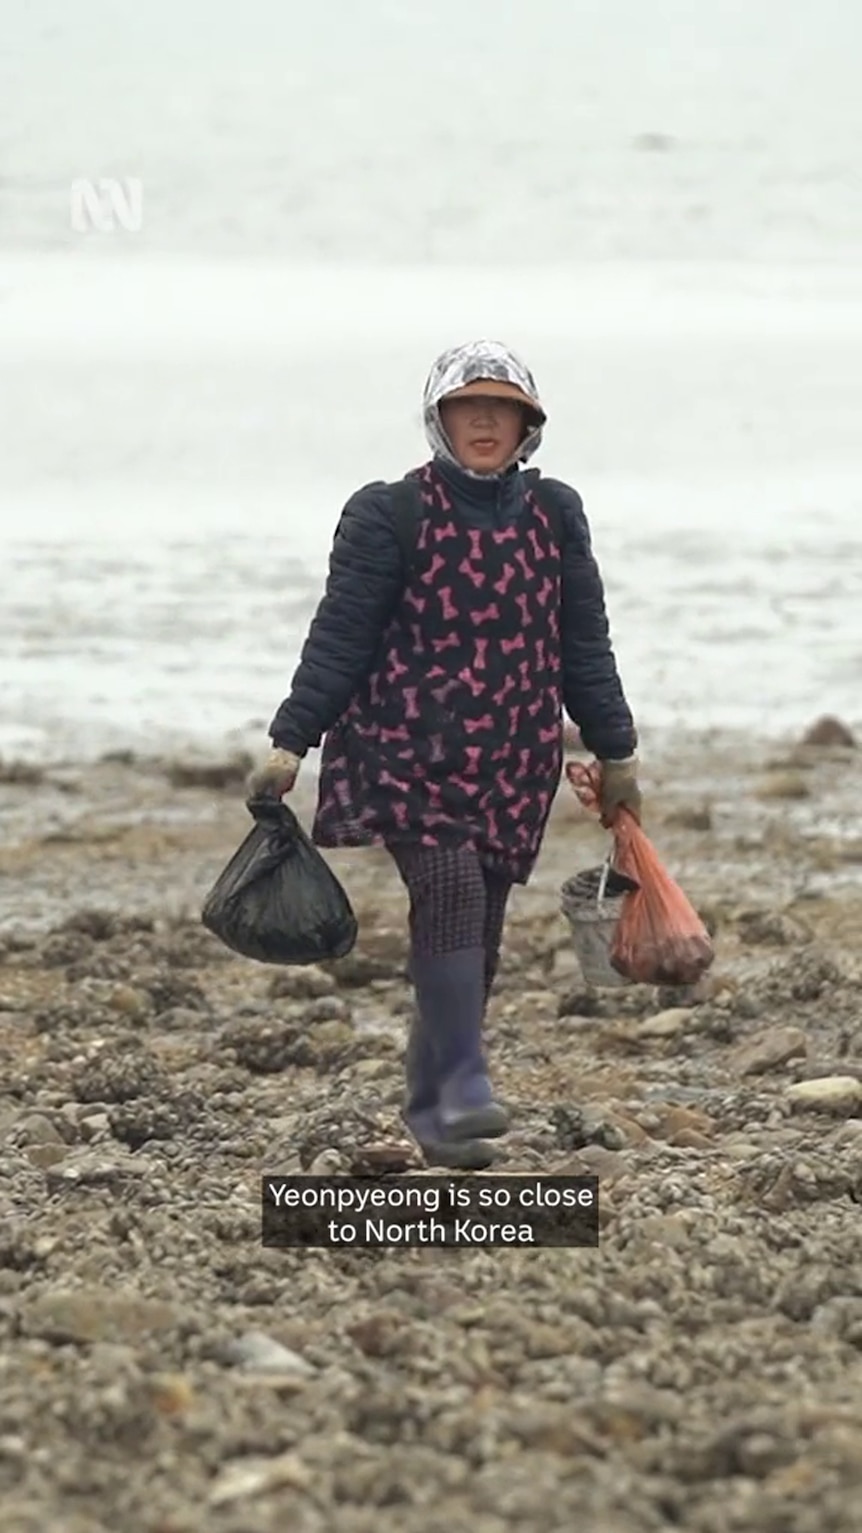 A woman with Asian features wearing gumboots walks on a rocky surface by the sea, plastic bags in each hand